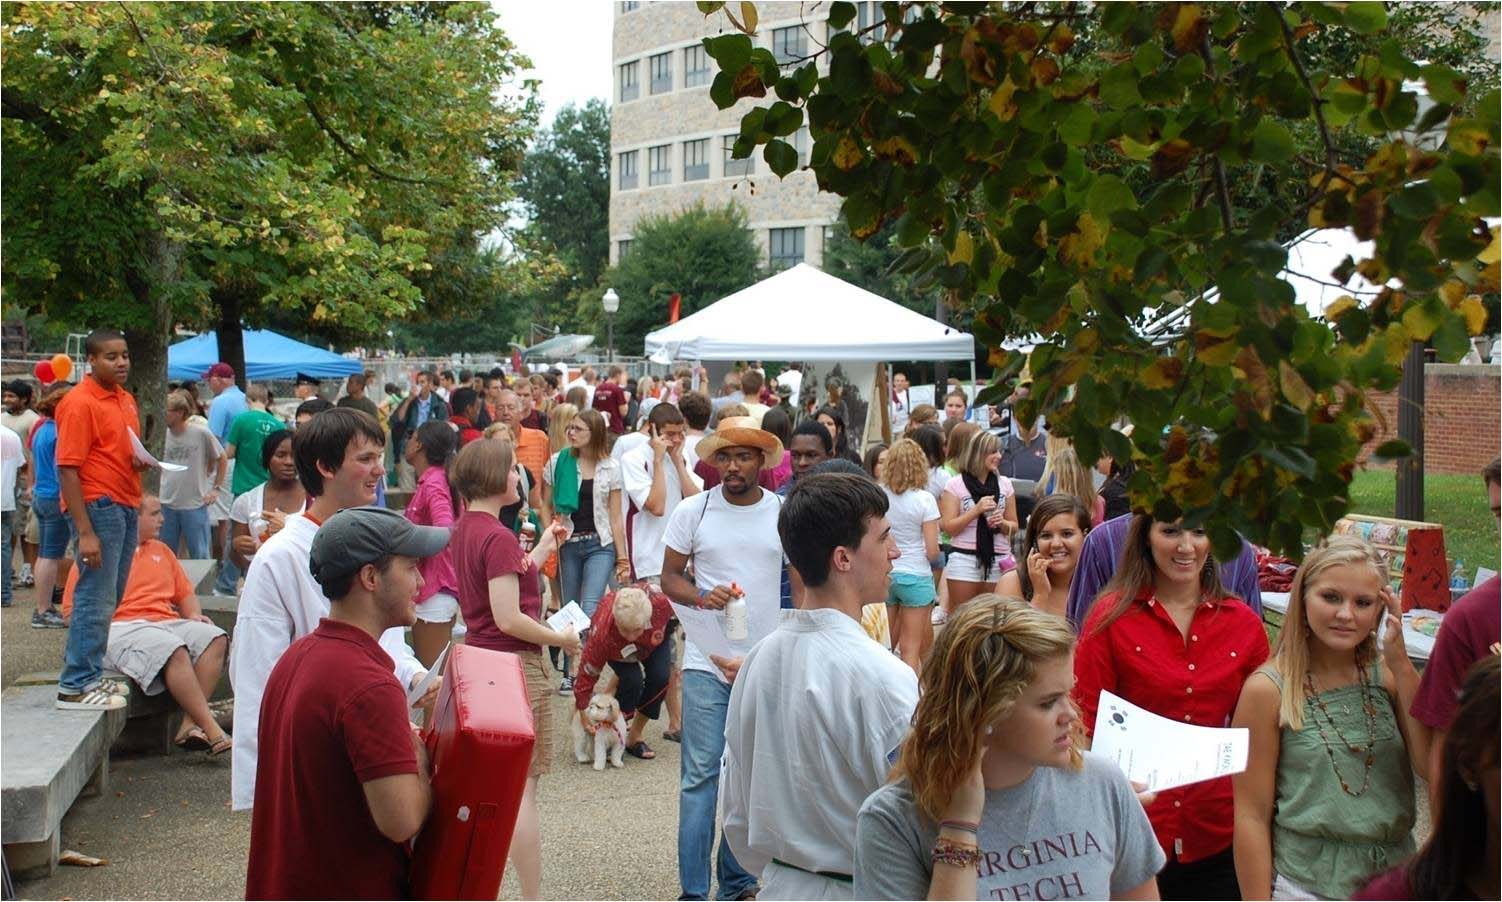 More than 18,000 people took part in Gobblerfest 2009.